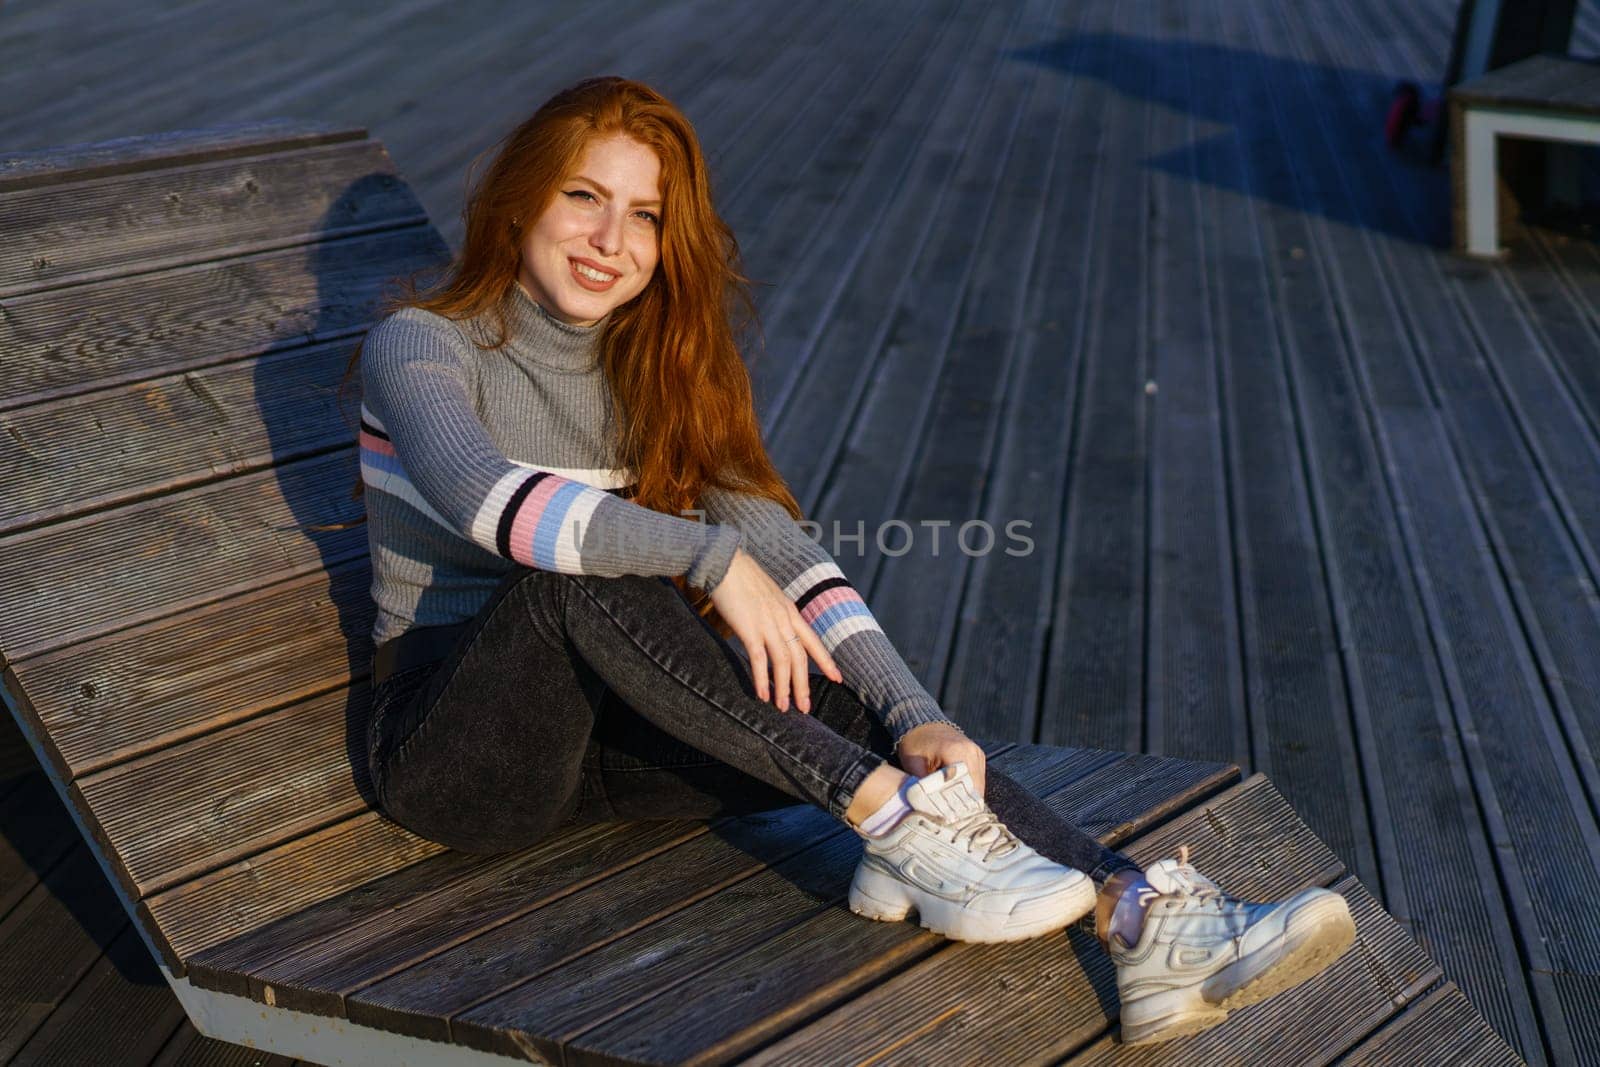 Happy young woman with red hair in the park on wooden flooring by EkaterinaPereslavtseva